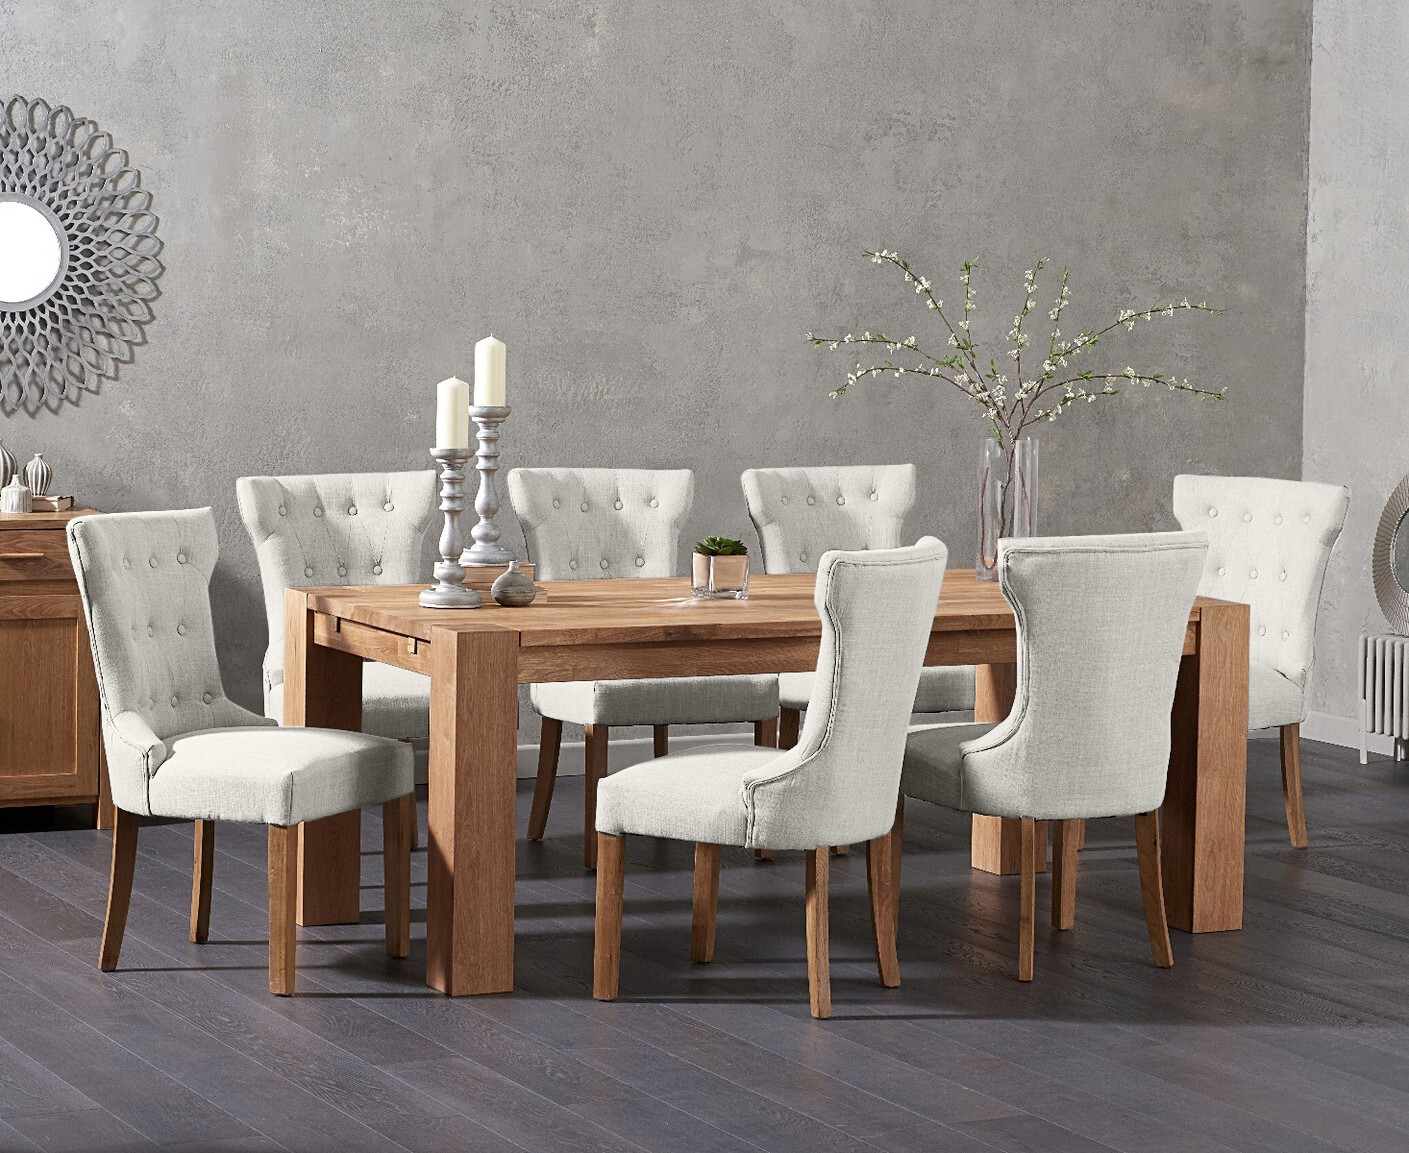 Photo 2 of Sheringham 200cm solid oak dining table with 8 grey clara chairs